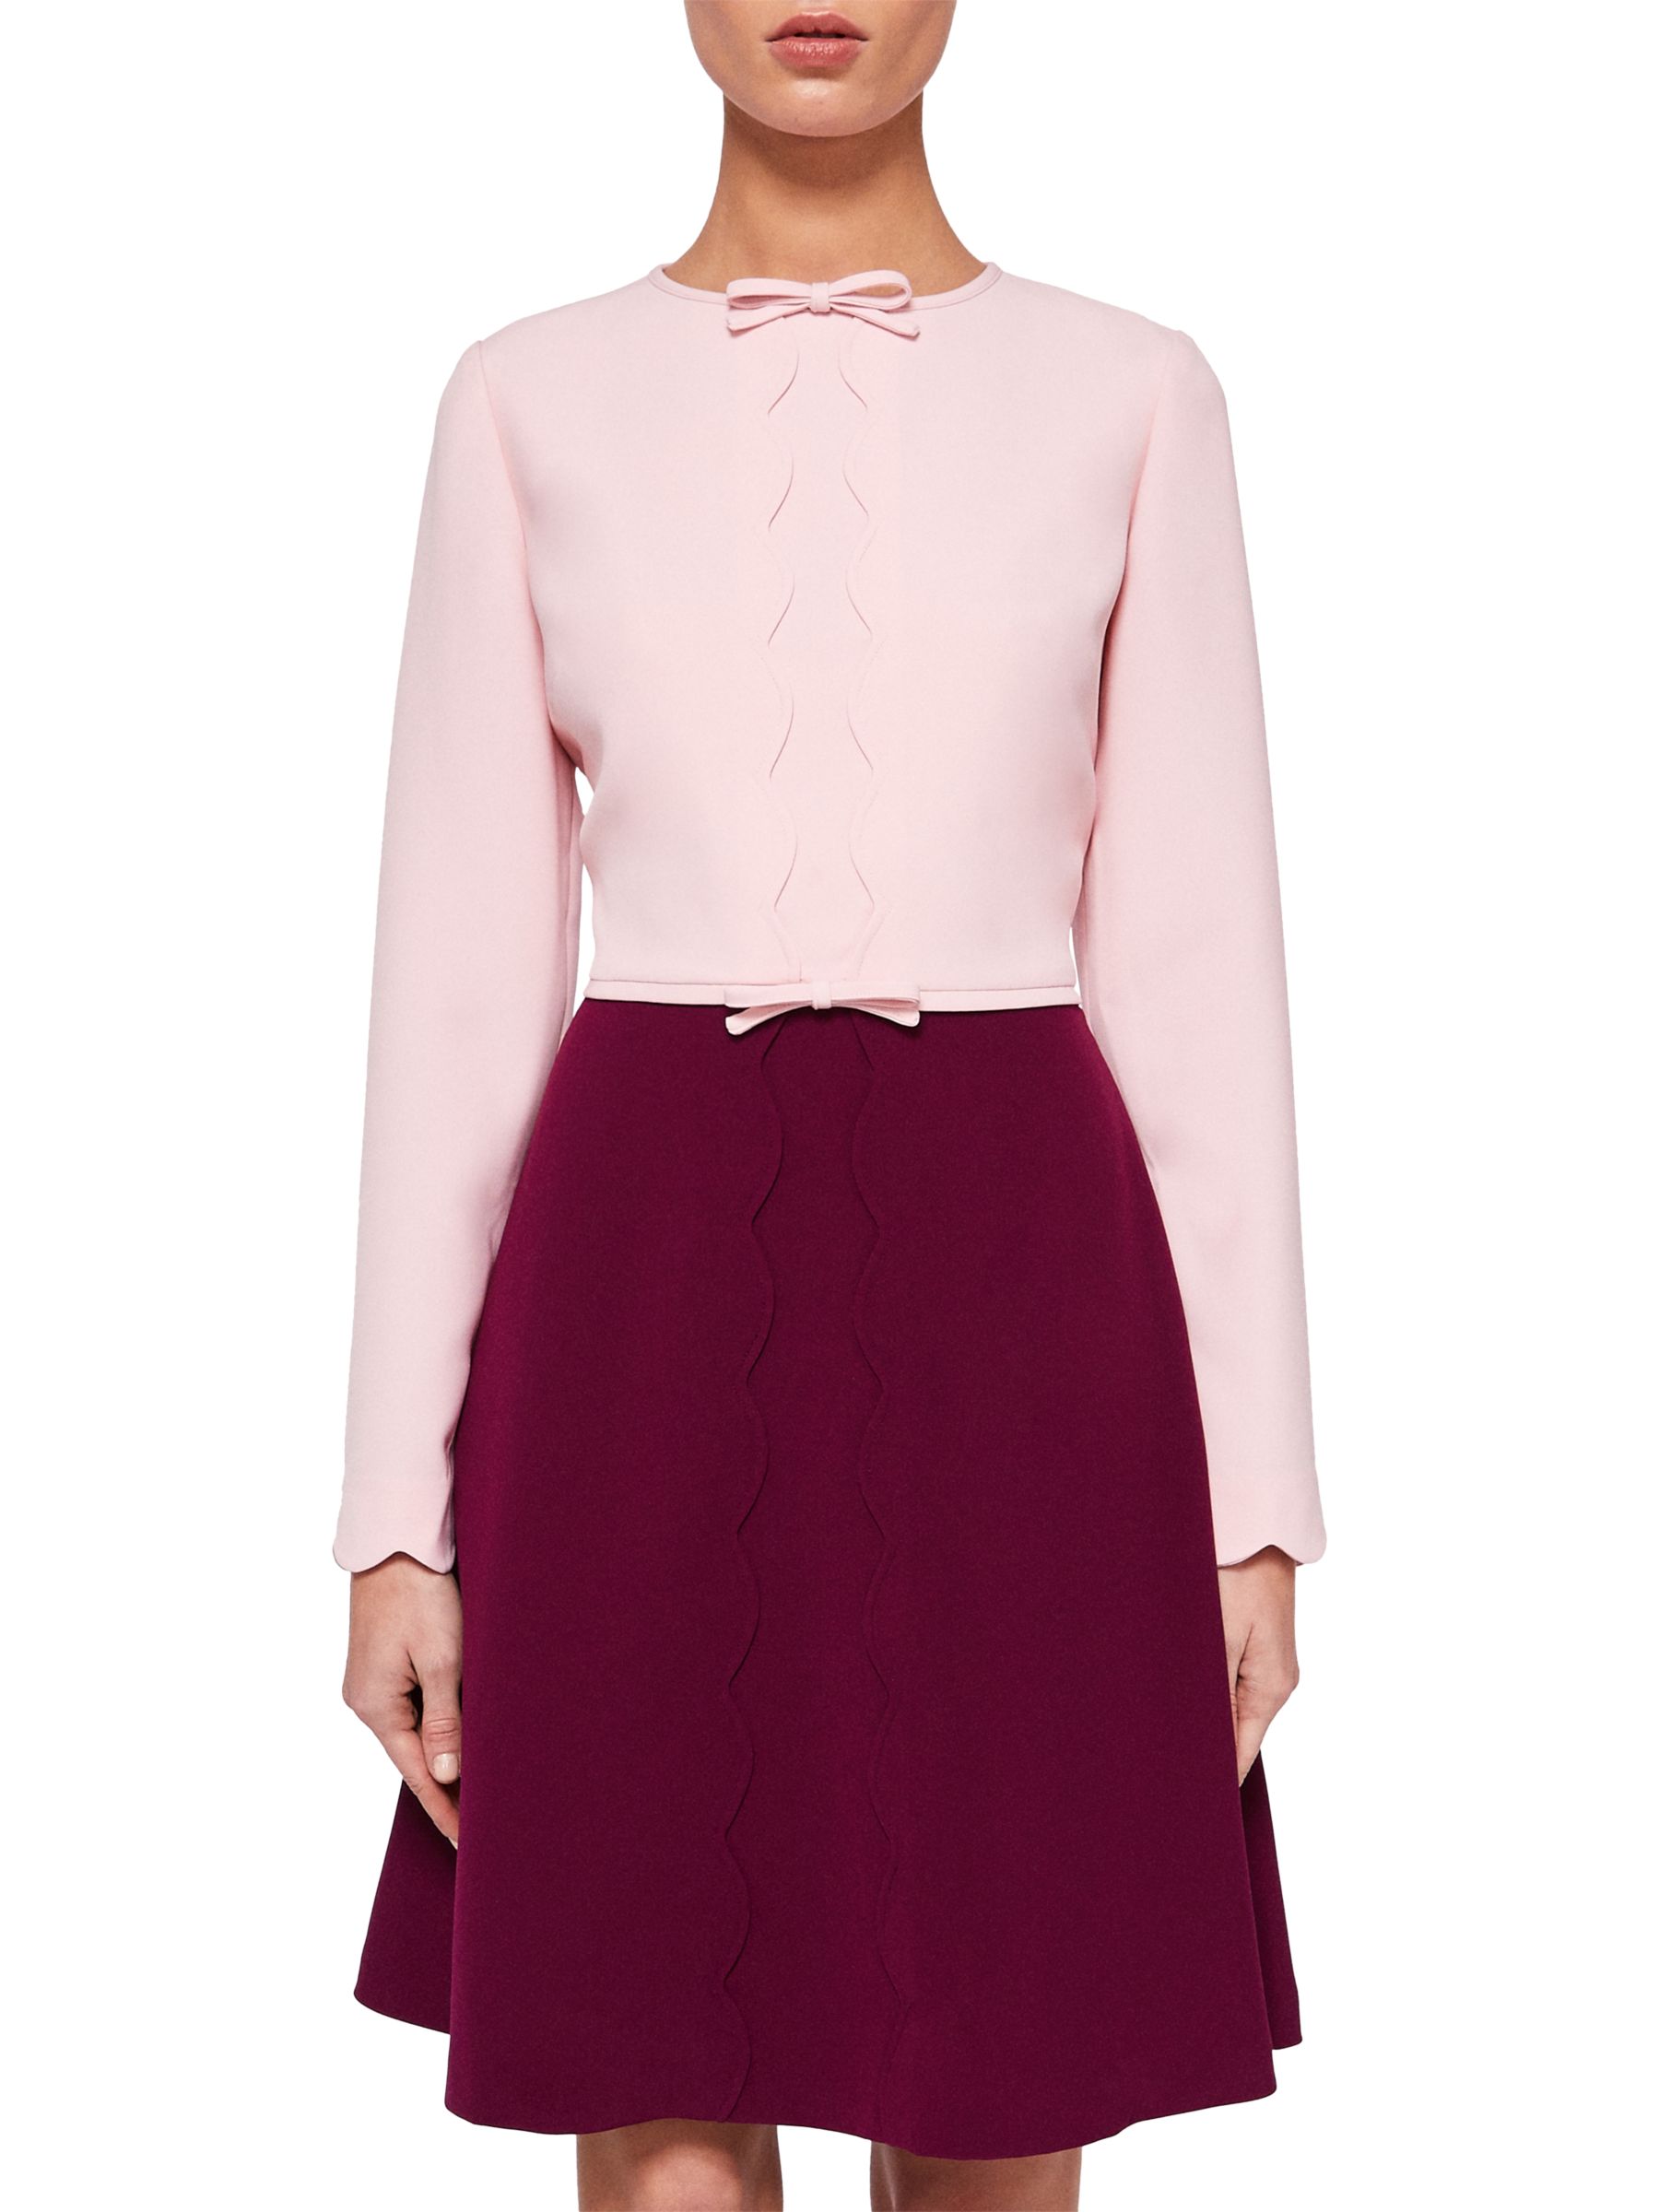 Ted Baker Preenna Scalloped Bow Detail Dress, Dusky Pink